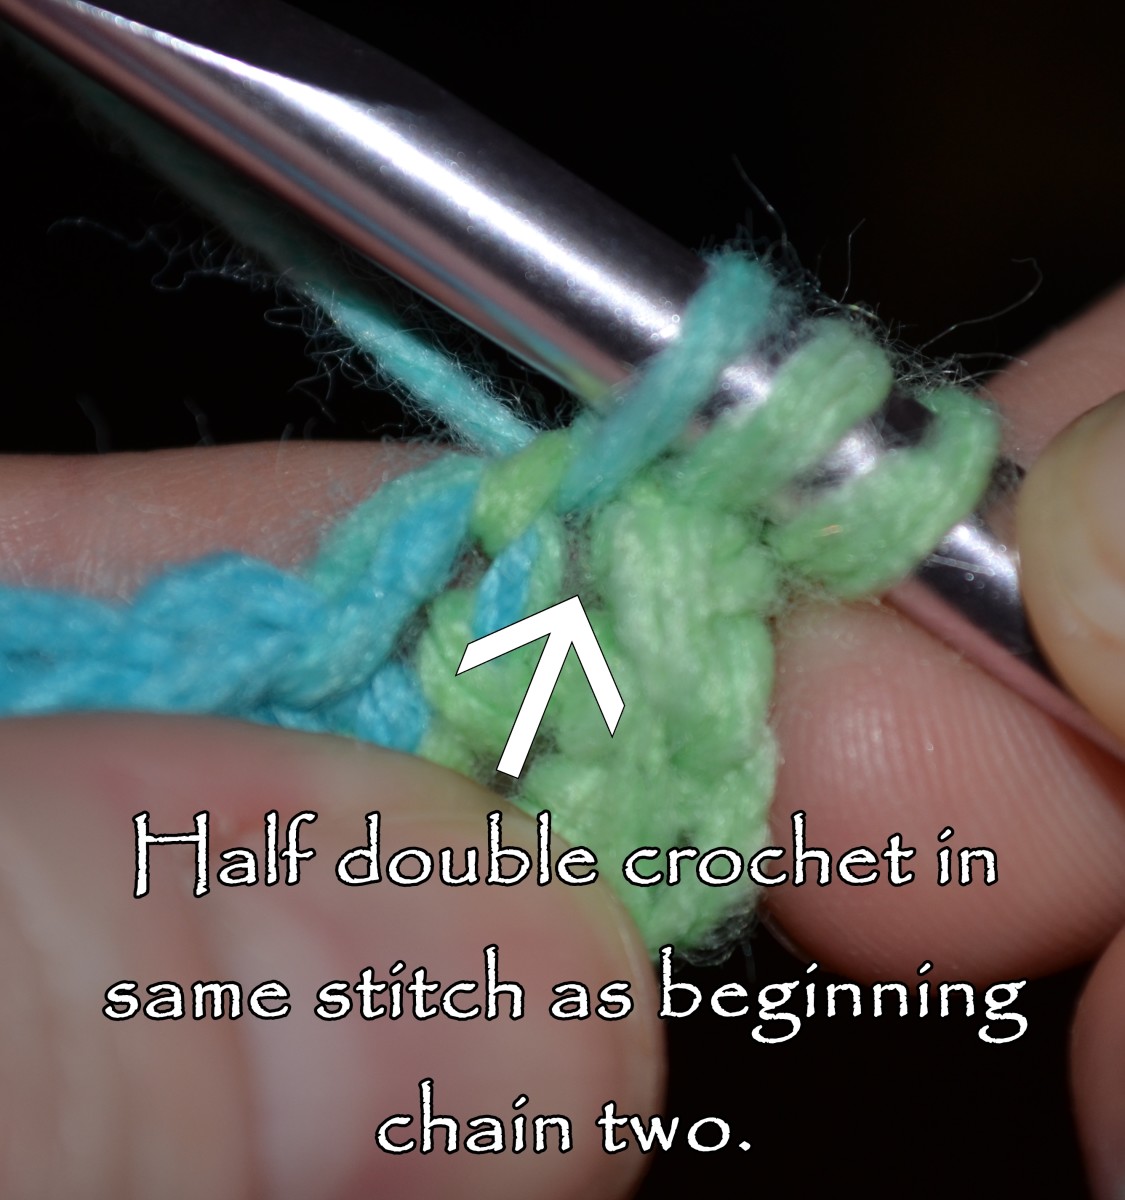 Half double crochet in same stitch as beginning chain two.